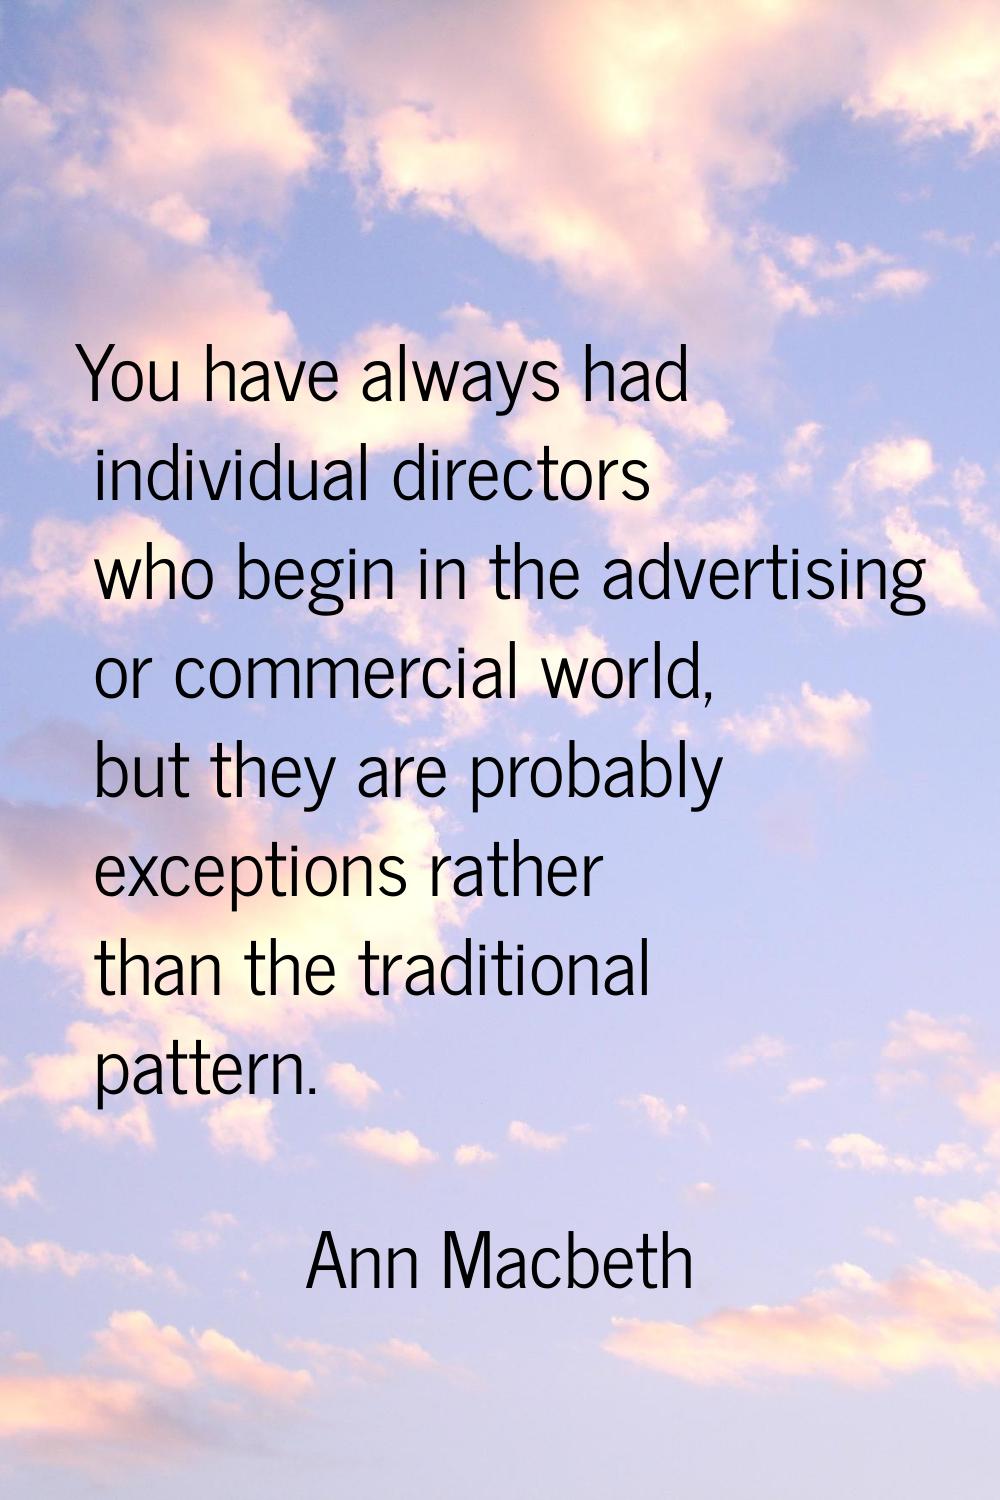 You have always had individual directors who begin in the advertising or commercial world, but they